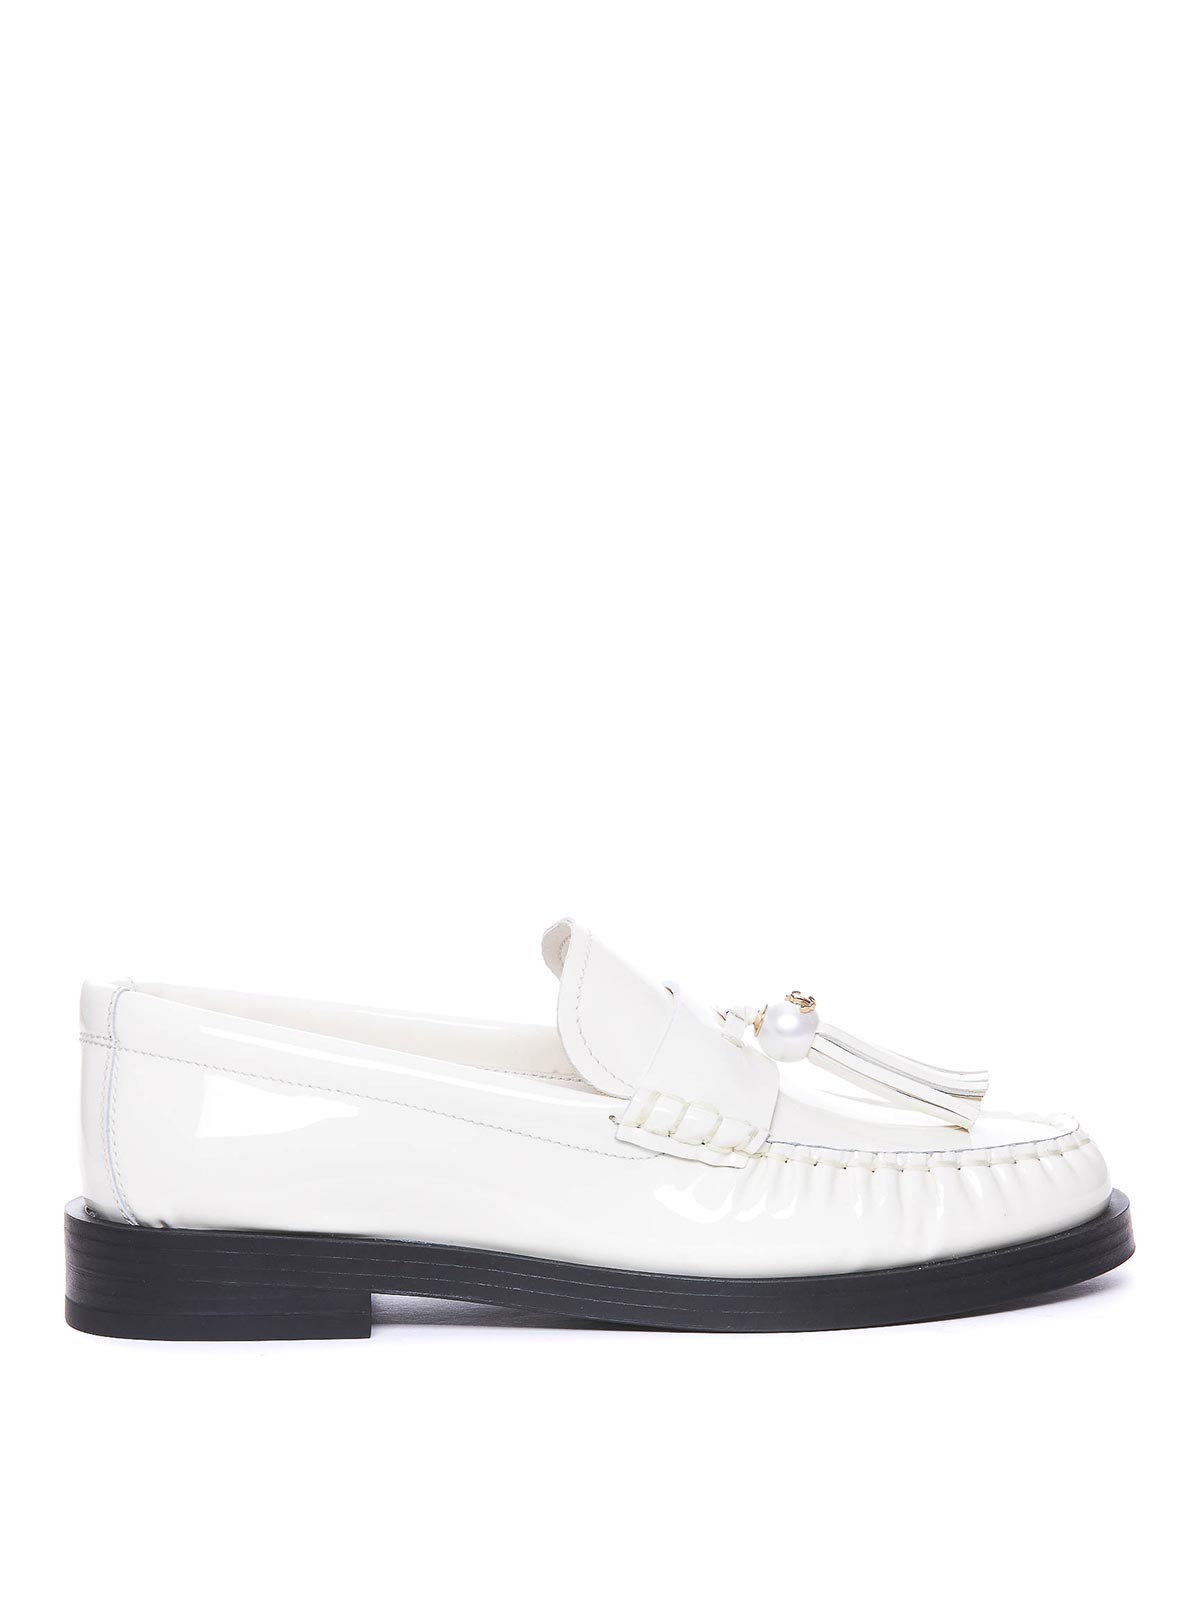 Shop Jimmy Choo White Addie Loafers Round Toe